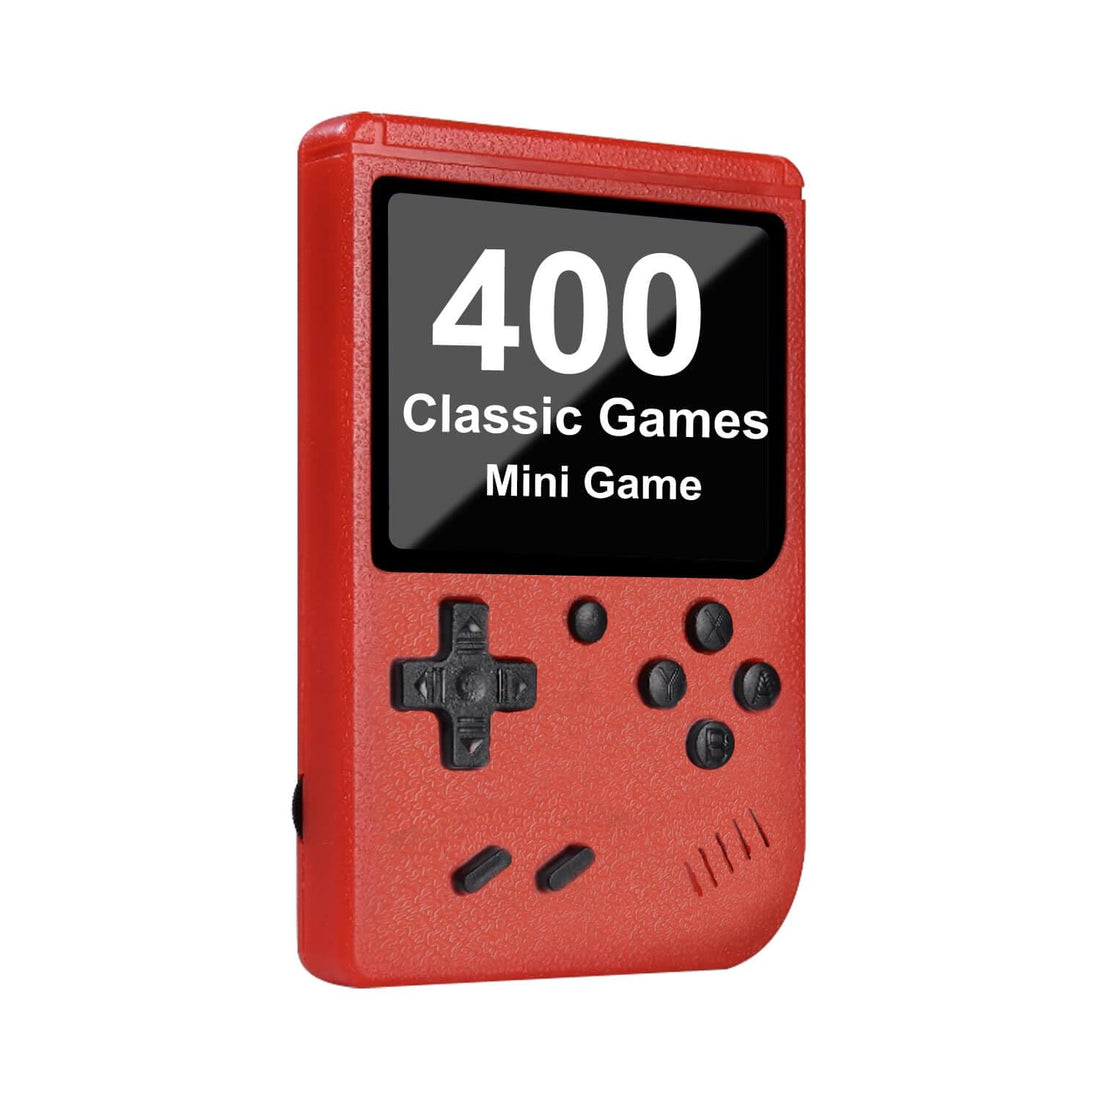 Handheld Game Console with 400 in 1 Classical FC Games Console 3.0-Inch Colour Screen,Gift Christmas Birthday Presents for Kids, Adults (Red)